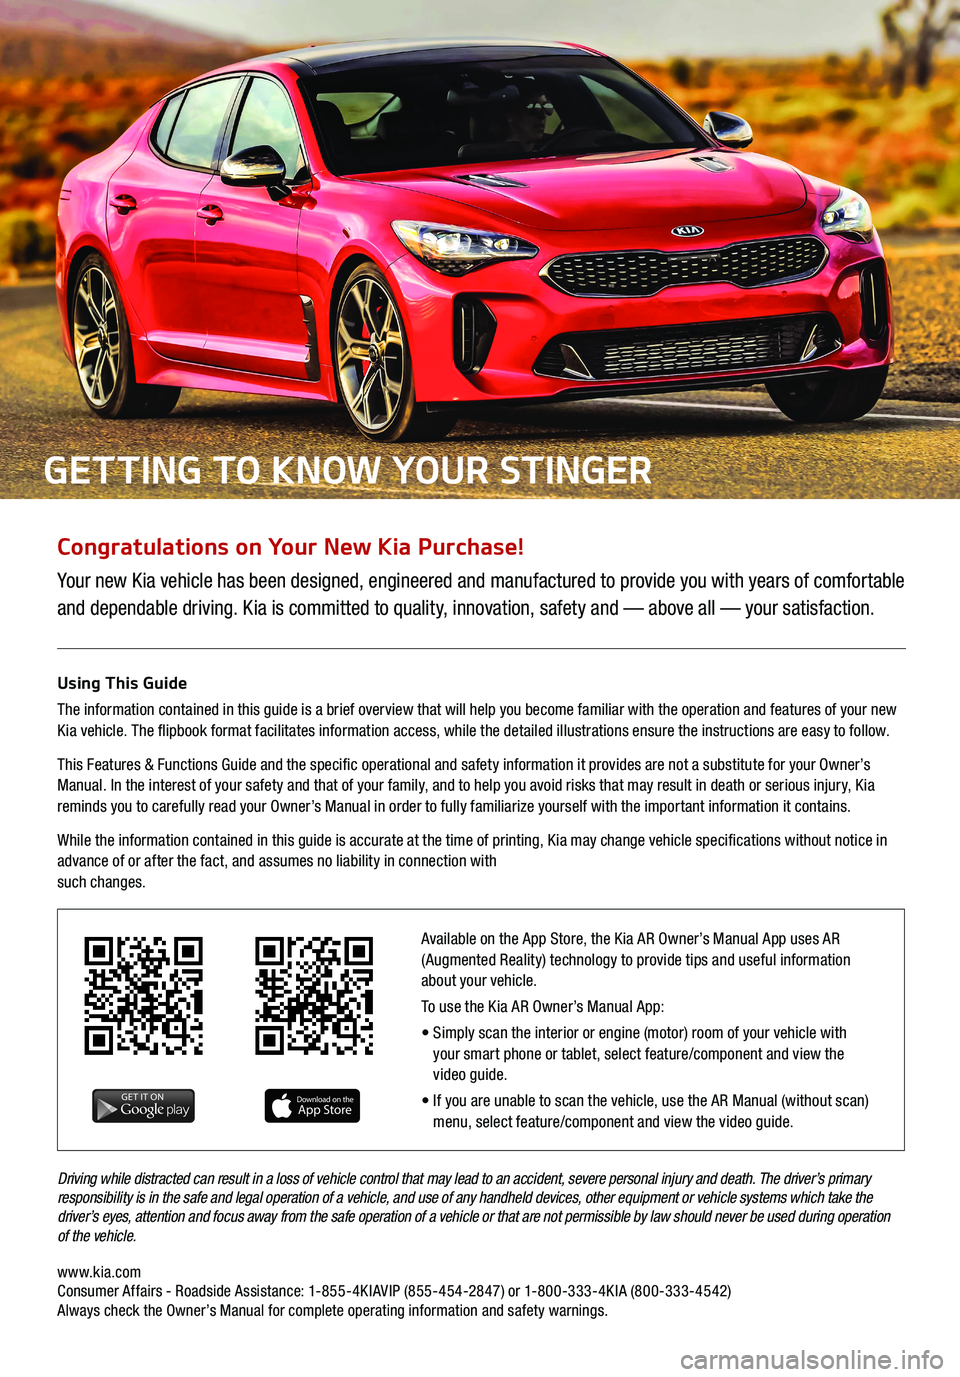 KIA STINGER 2018  Features and Functions Guide Congratulations on Your New Kia Purchase!
Your new Kia vehicle has been designed, engineered and manufactured to provide you with years of comfortable 
and dependable driving. Kia is committed to qual